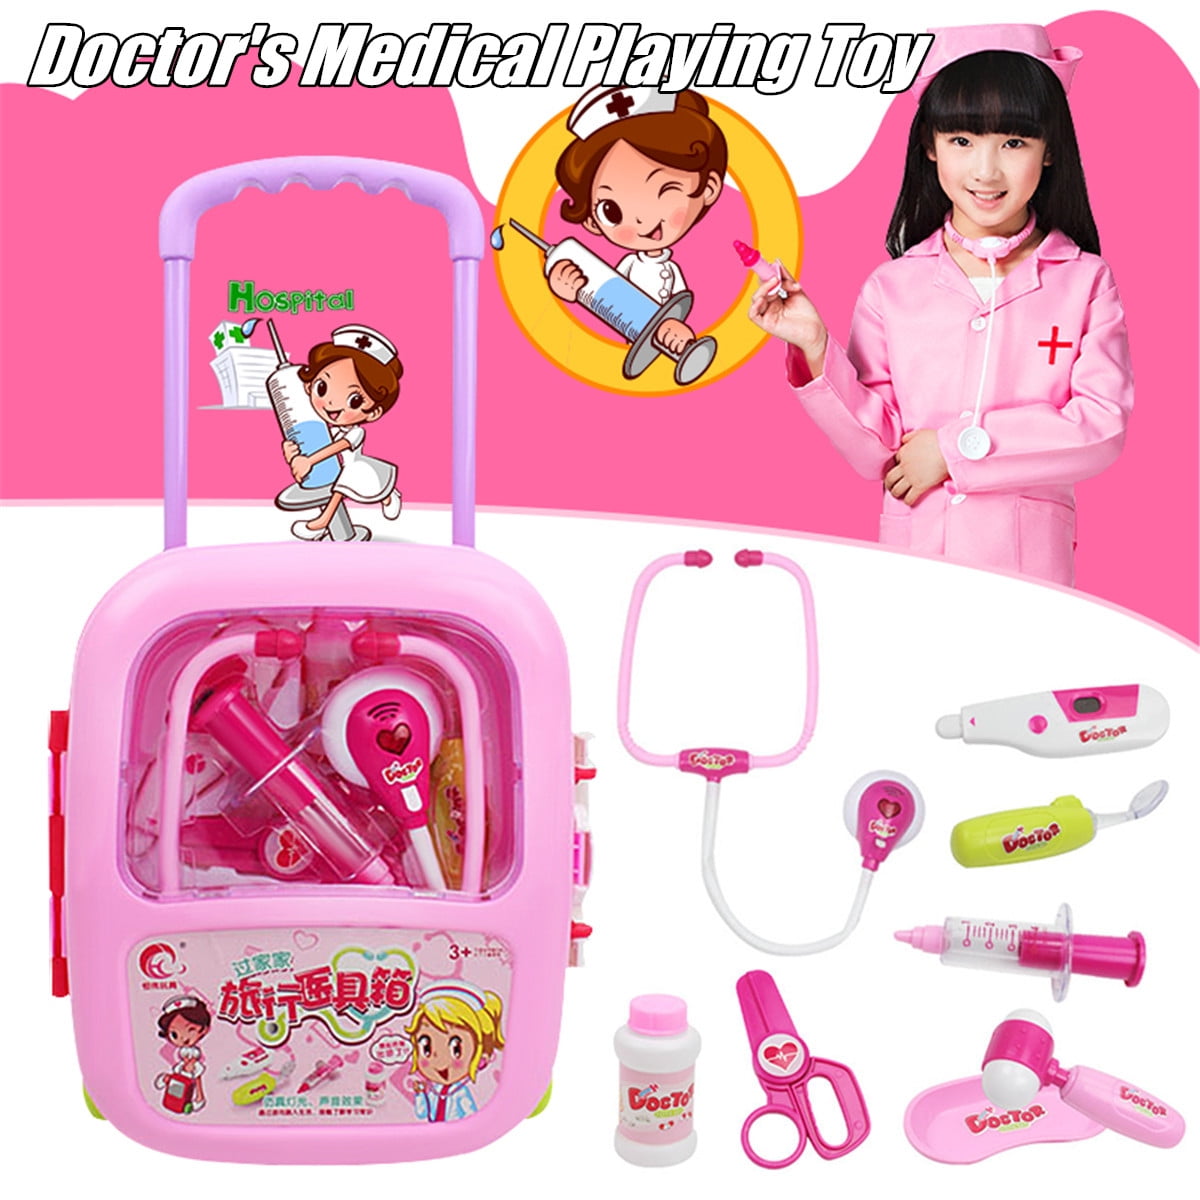 Doctors Suit Small Childrens Toys Nurse Injection Tool Christmas Gifts,White,Suit Kids Play Kitchen Set Ducational Children